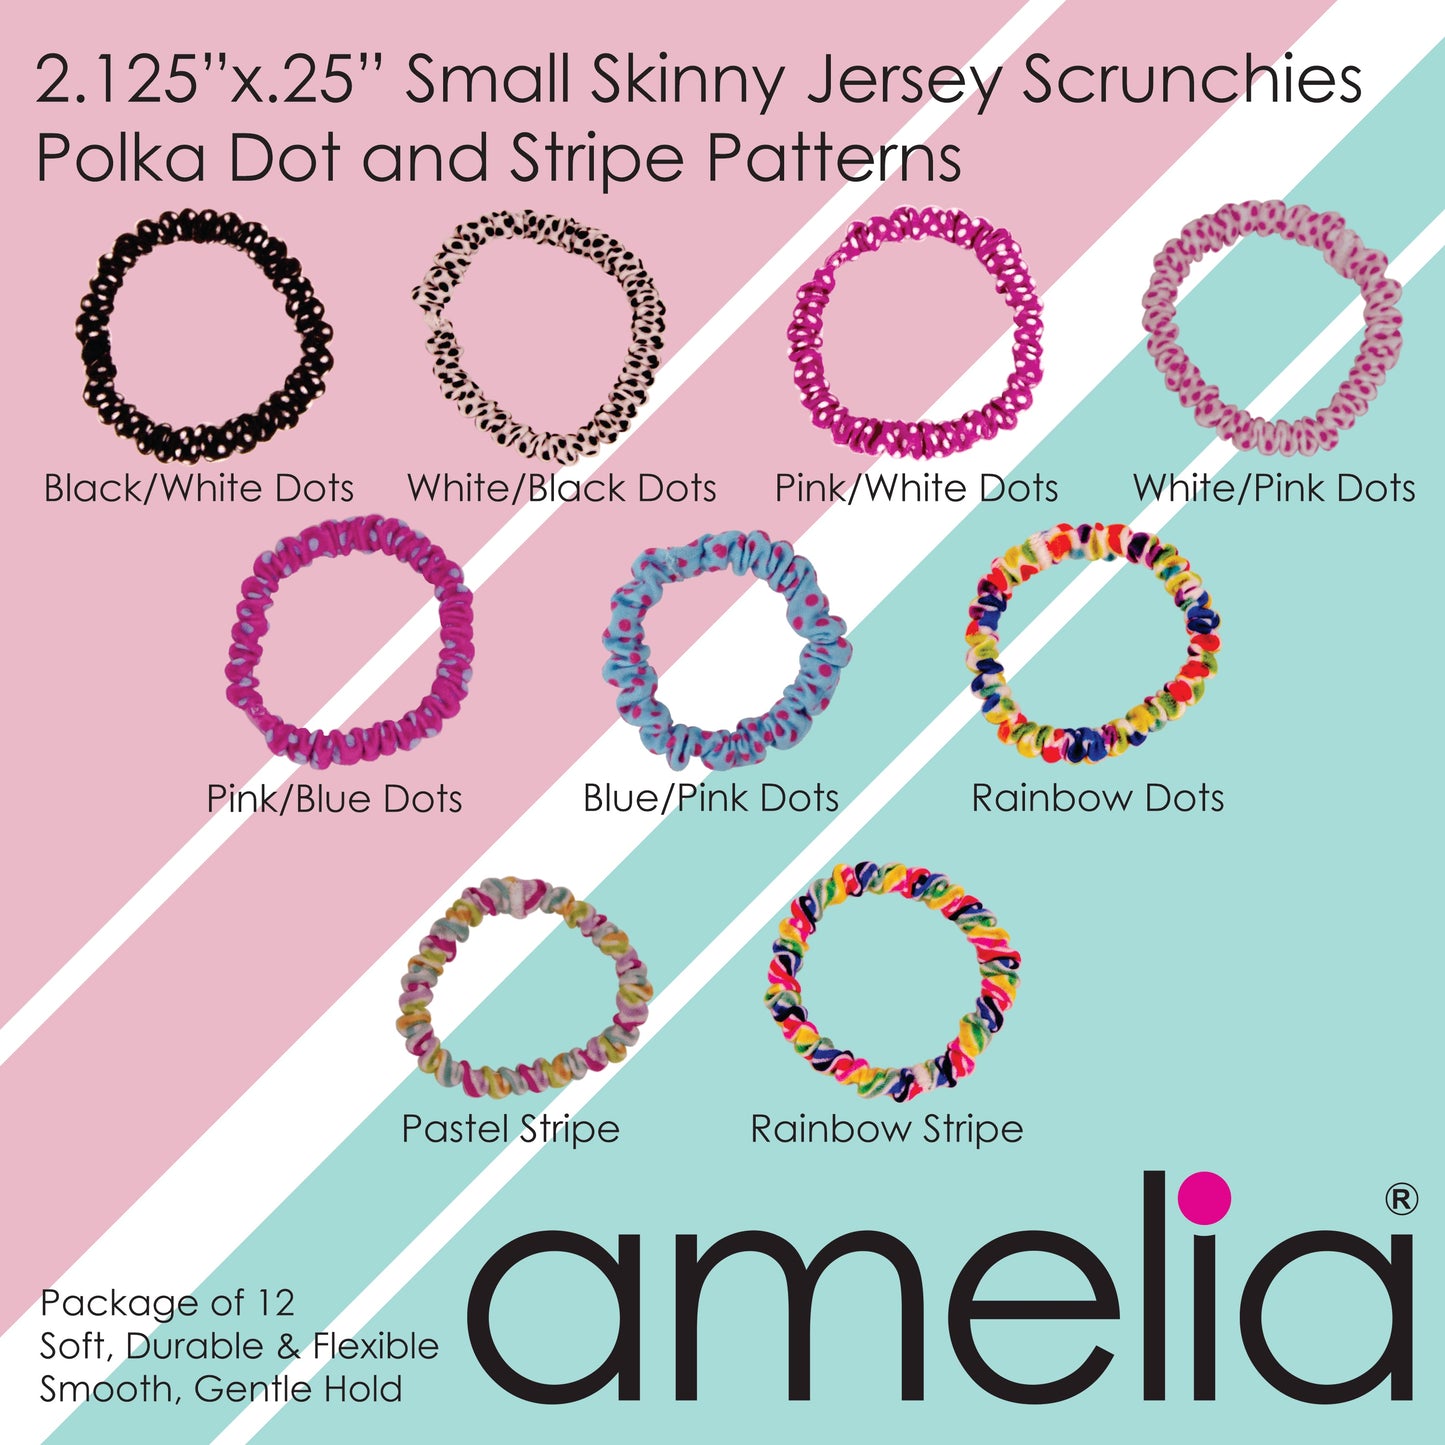 Amelia Beauty, Fall Blend Skinny Jersey Scrunchies, 2.125in Diameter, Gentle on Hair, Strong Hold, No Snag, No Dents or Creases. 12 Pack